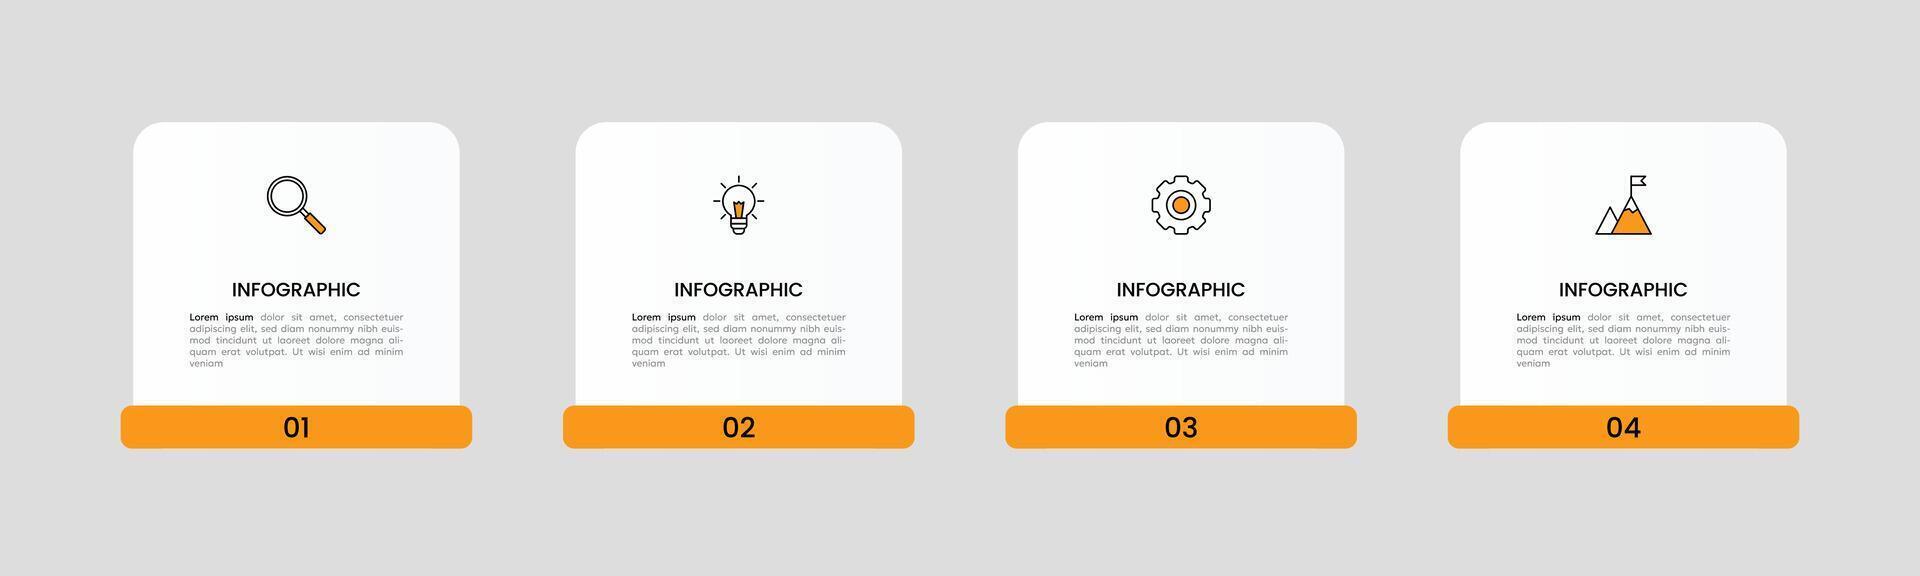 Infographic label design template with icons and 4 options or steps. vector